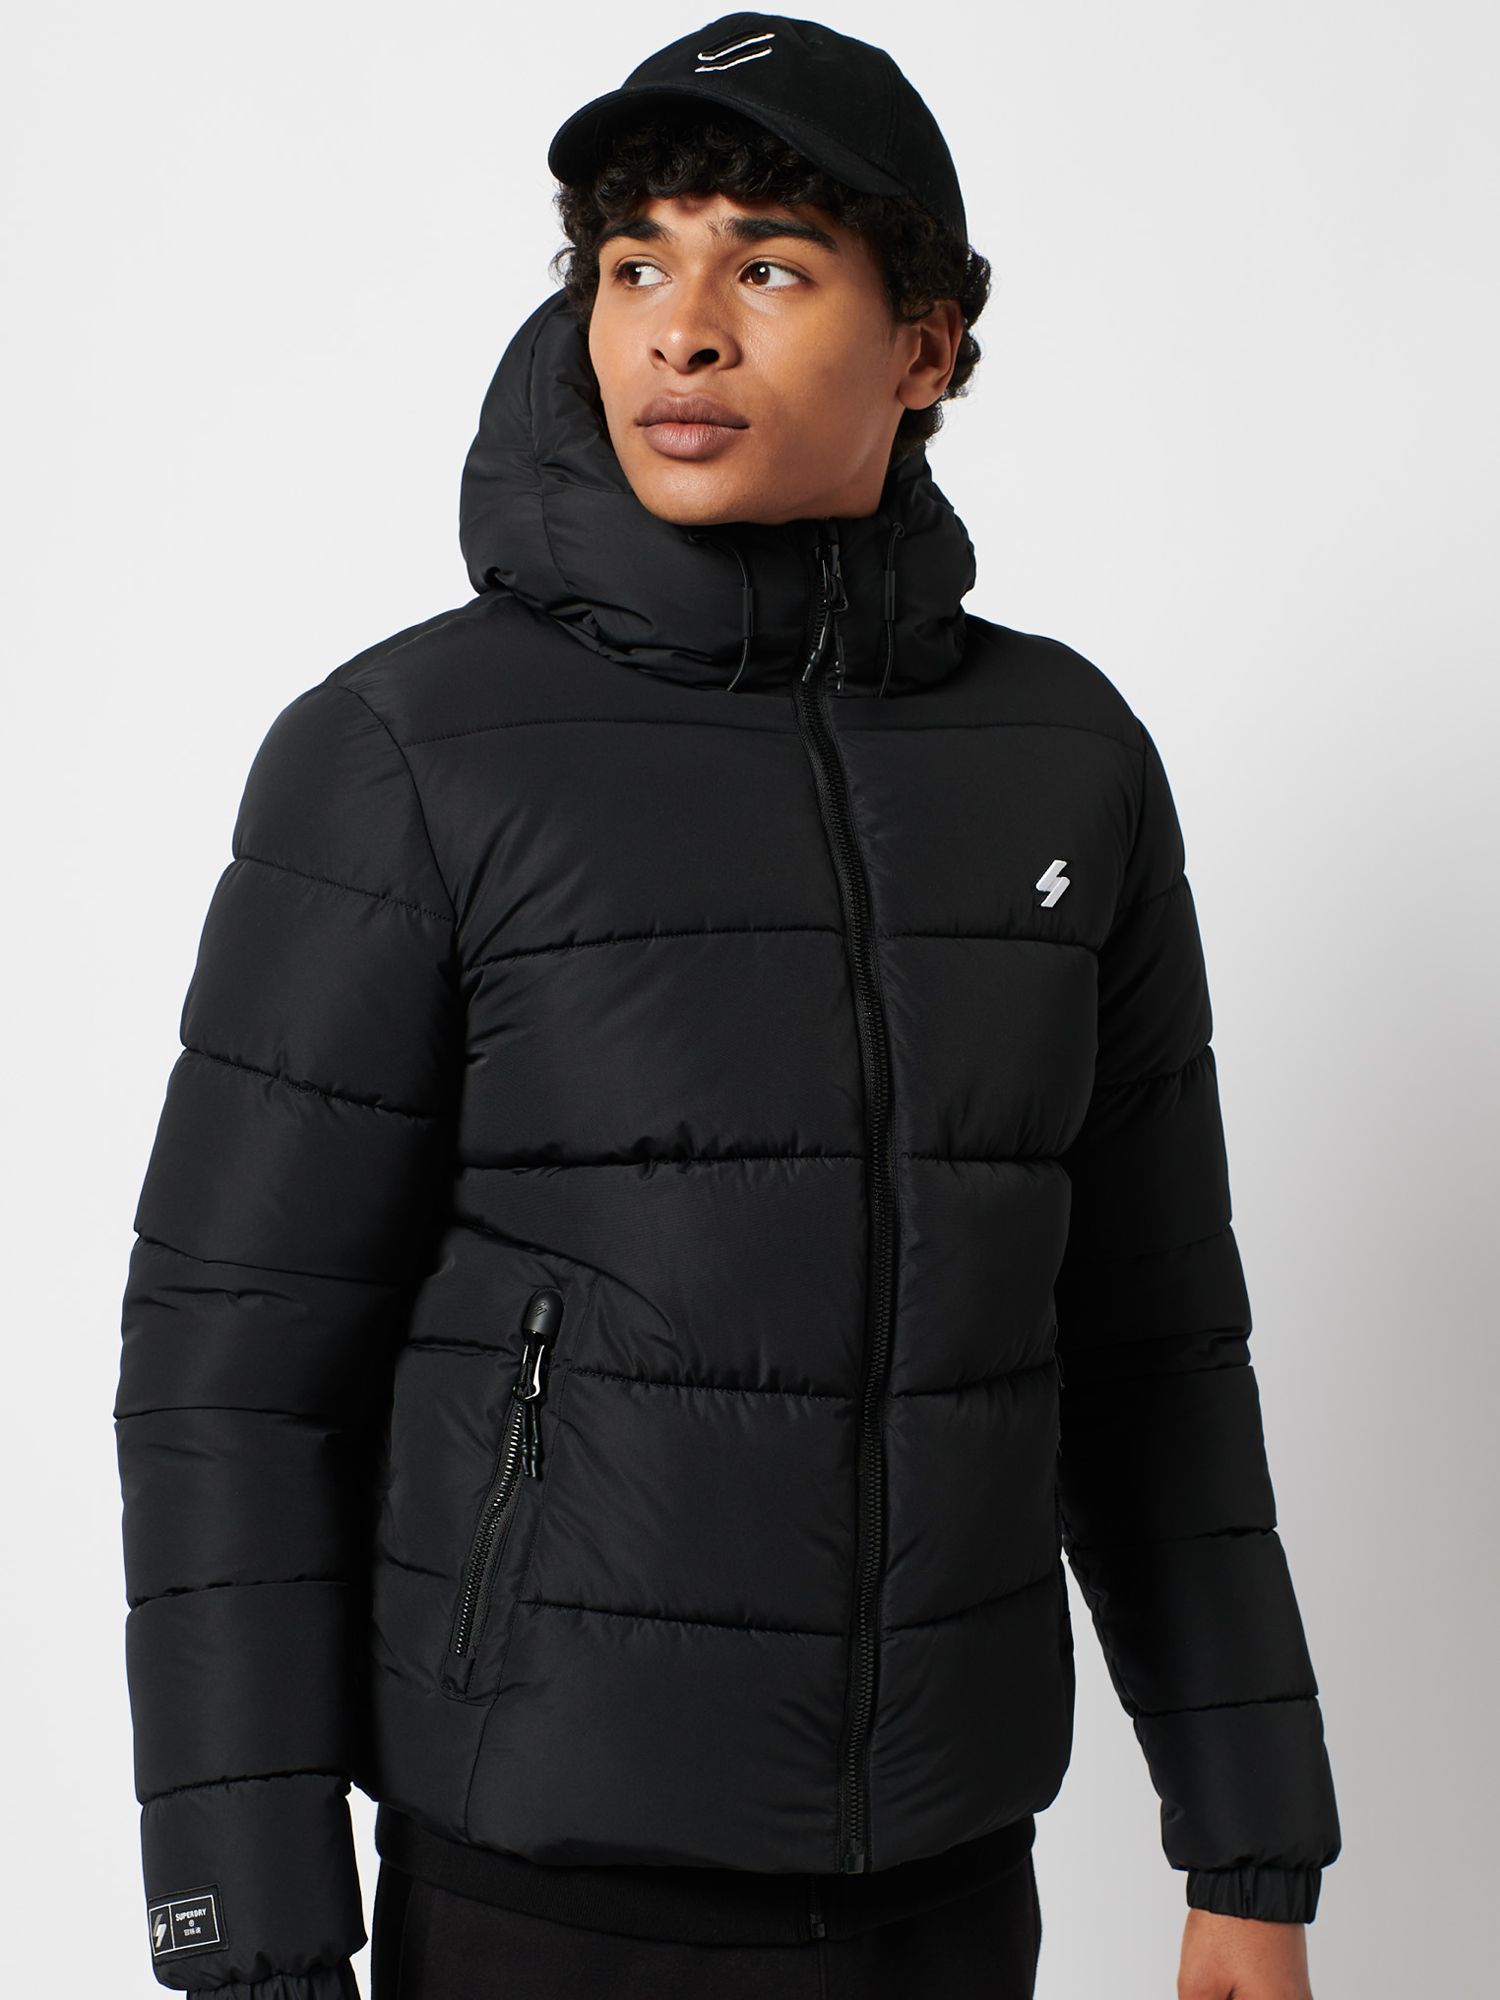 Superdry Hooded Sports Puffer Jacket, Black at John Lewis & Partners